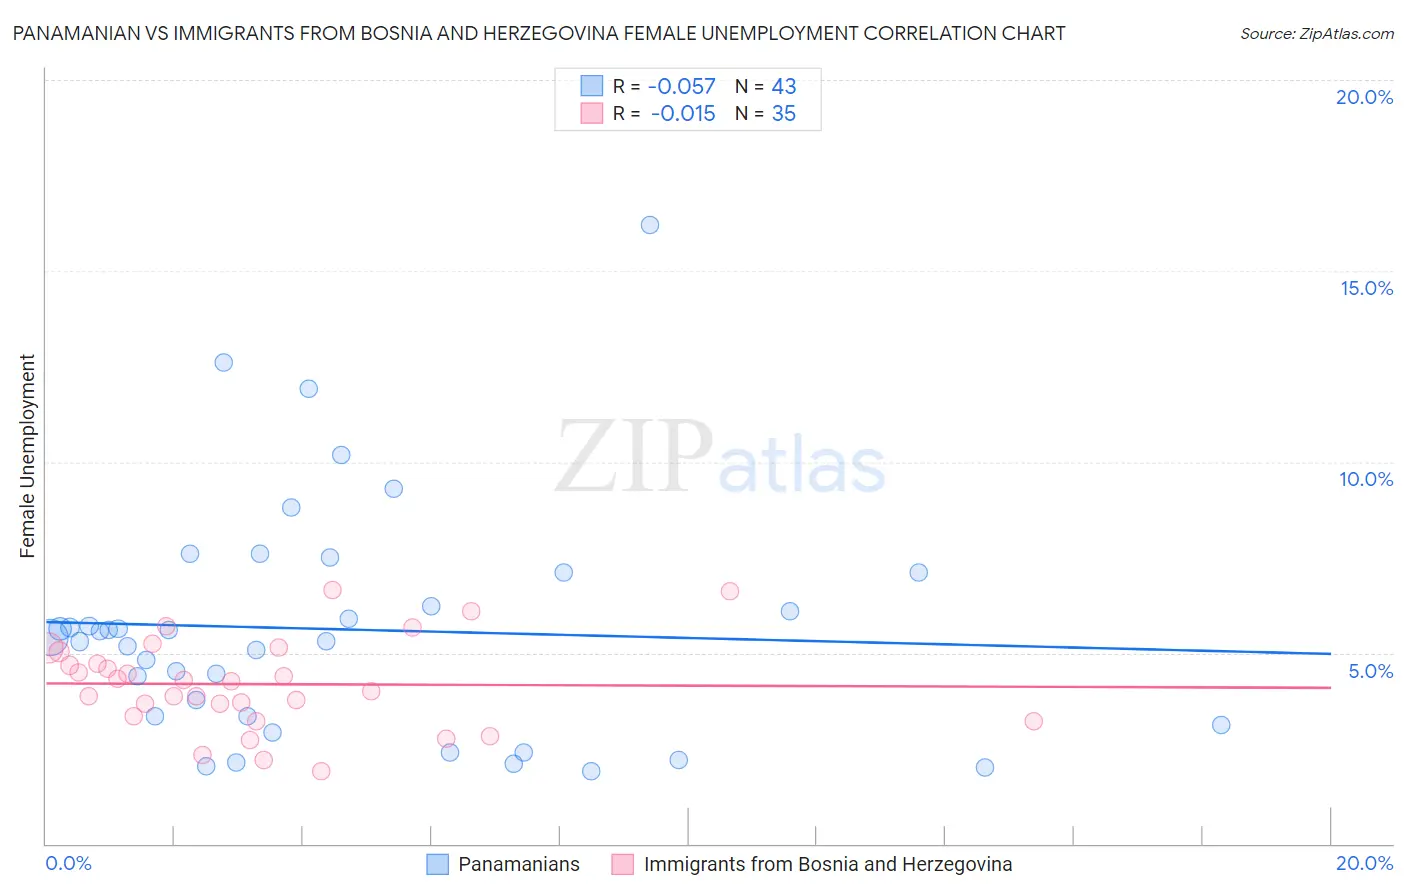 Panamanian vs Immigrants from Bosnia and Herzegovina Female Unemployment